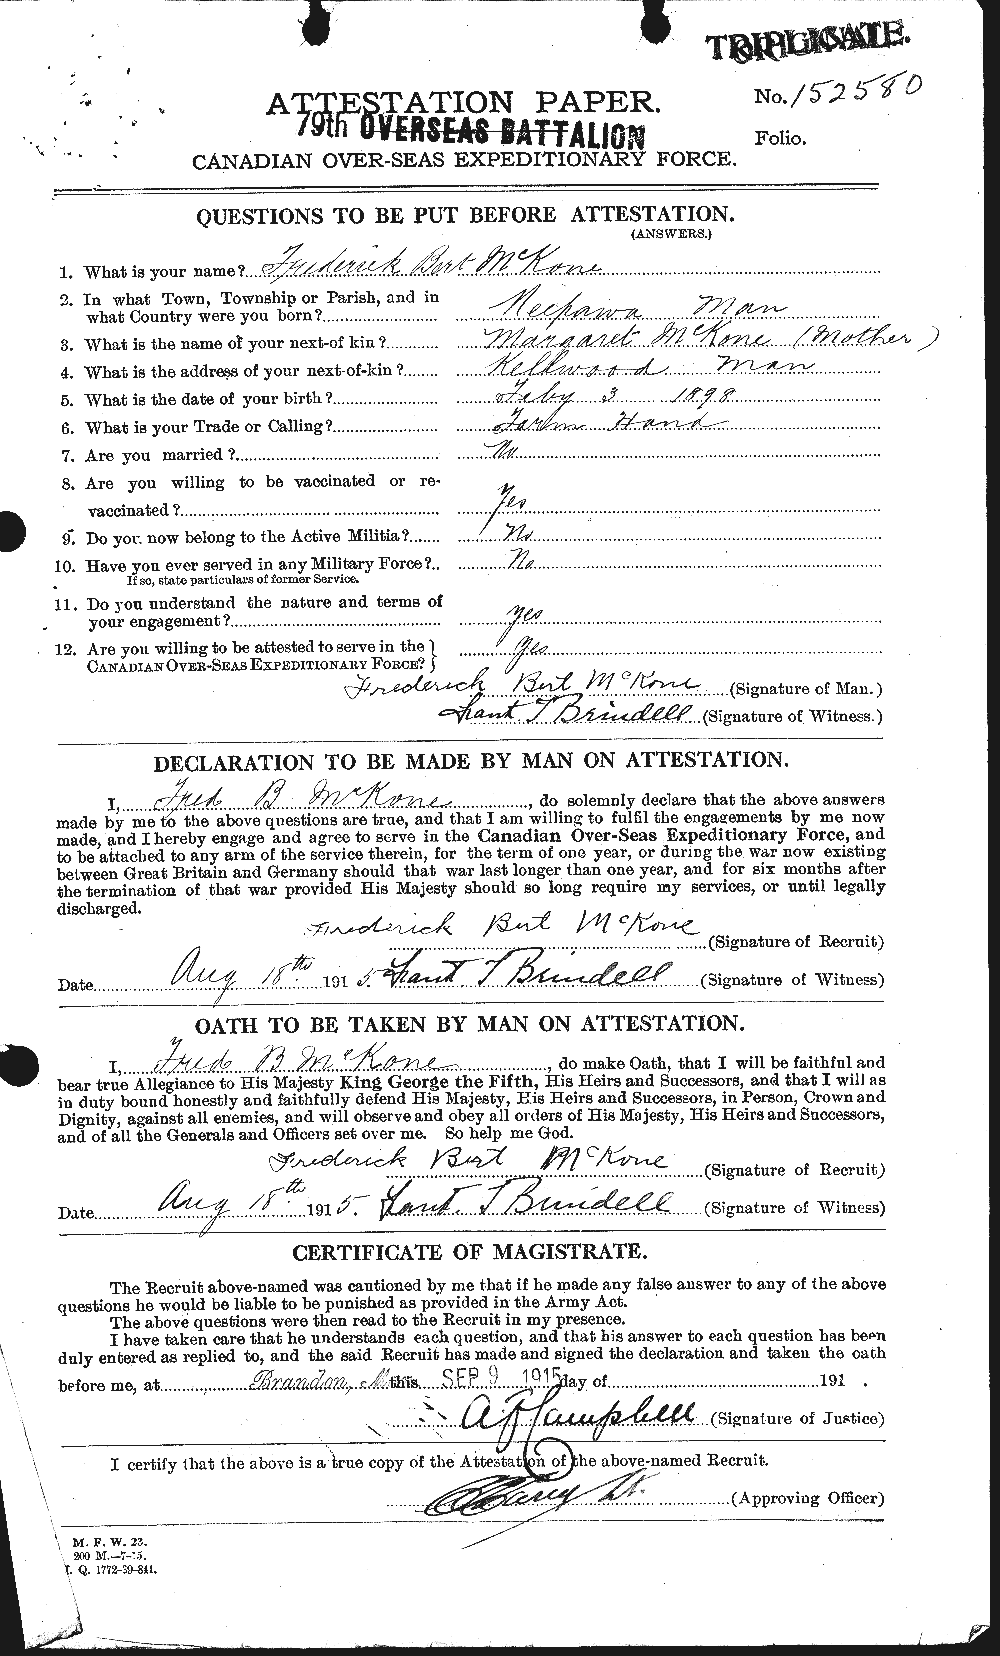 Personnel Records of the First World War - CEF 530774a